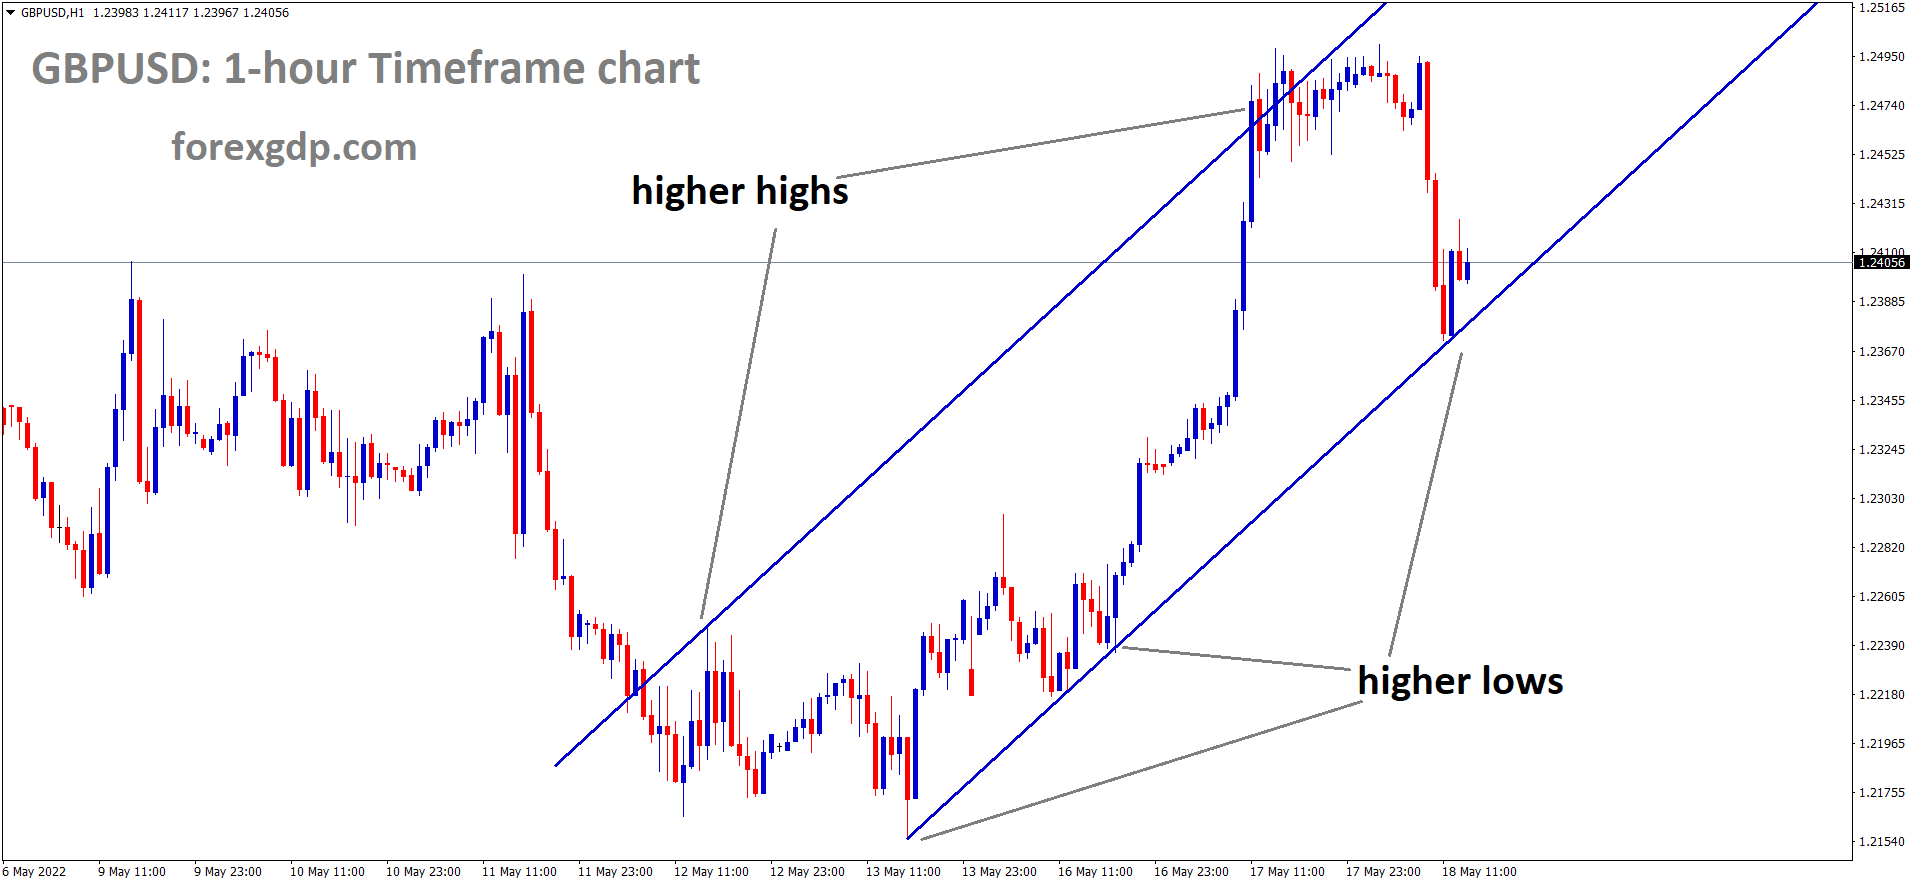 GBPUSD Market moving in ascending channel and reached higher low area of the channel.